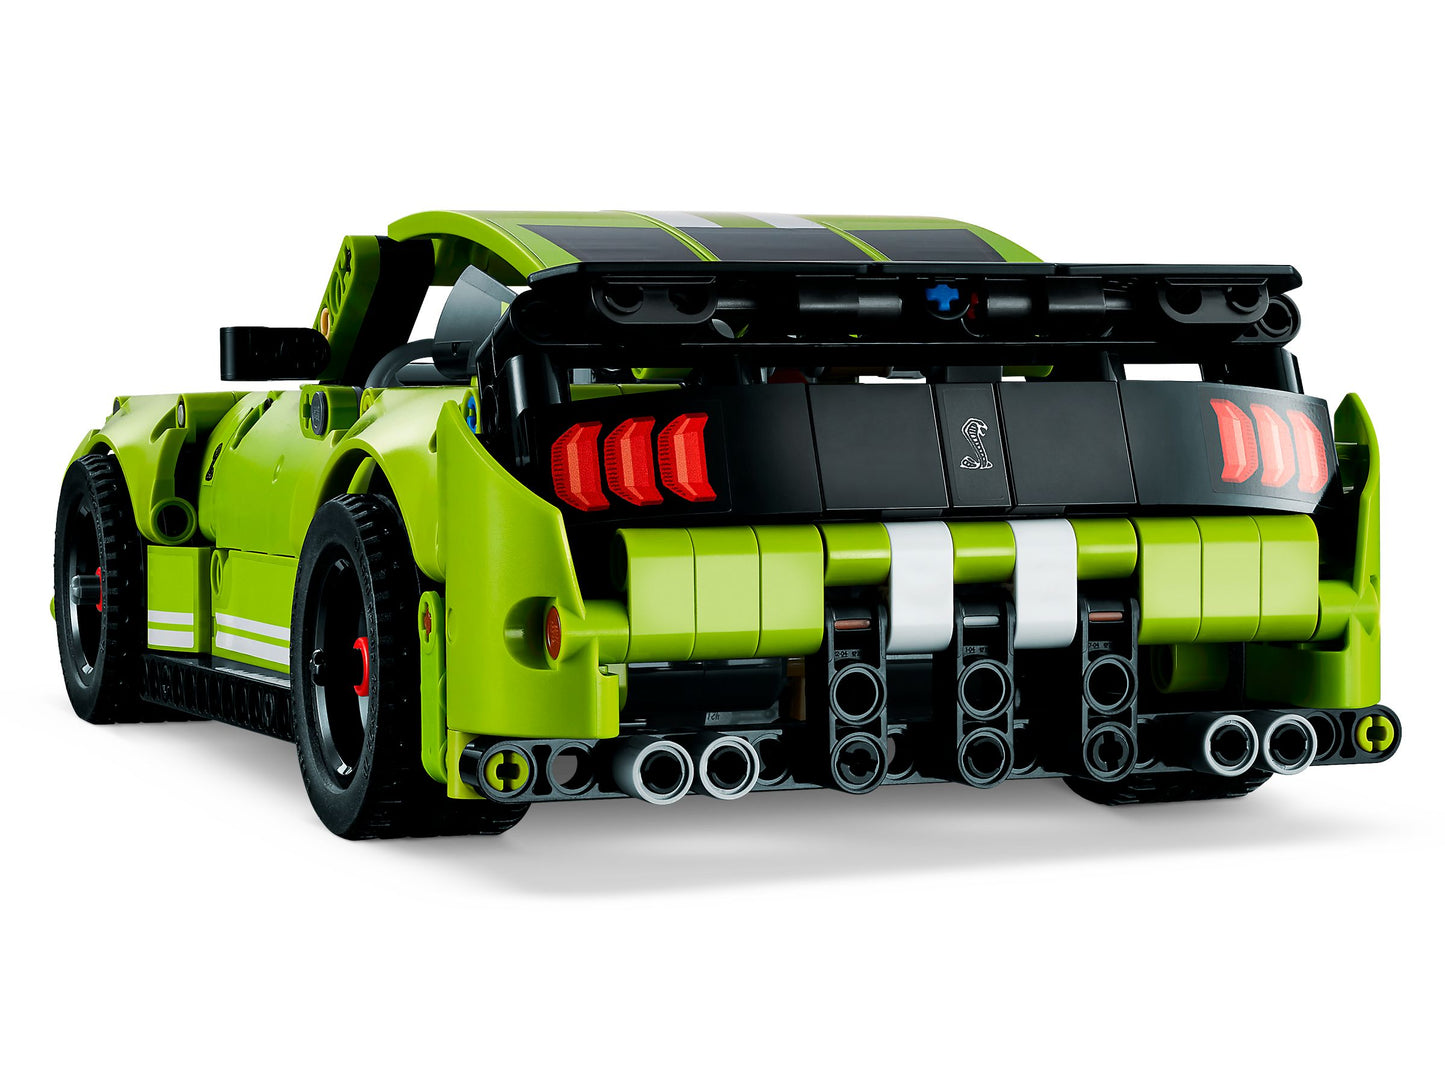 Technic 42138 Ford Mustang Shelby GT500®